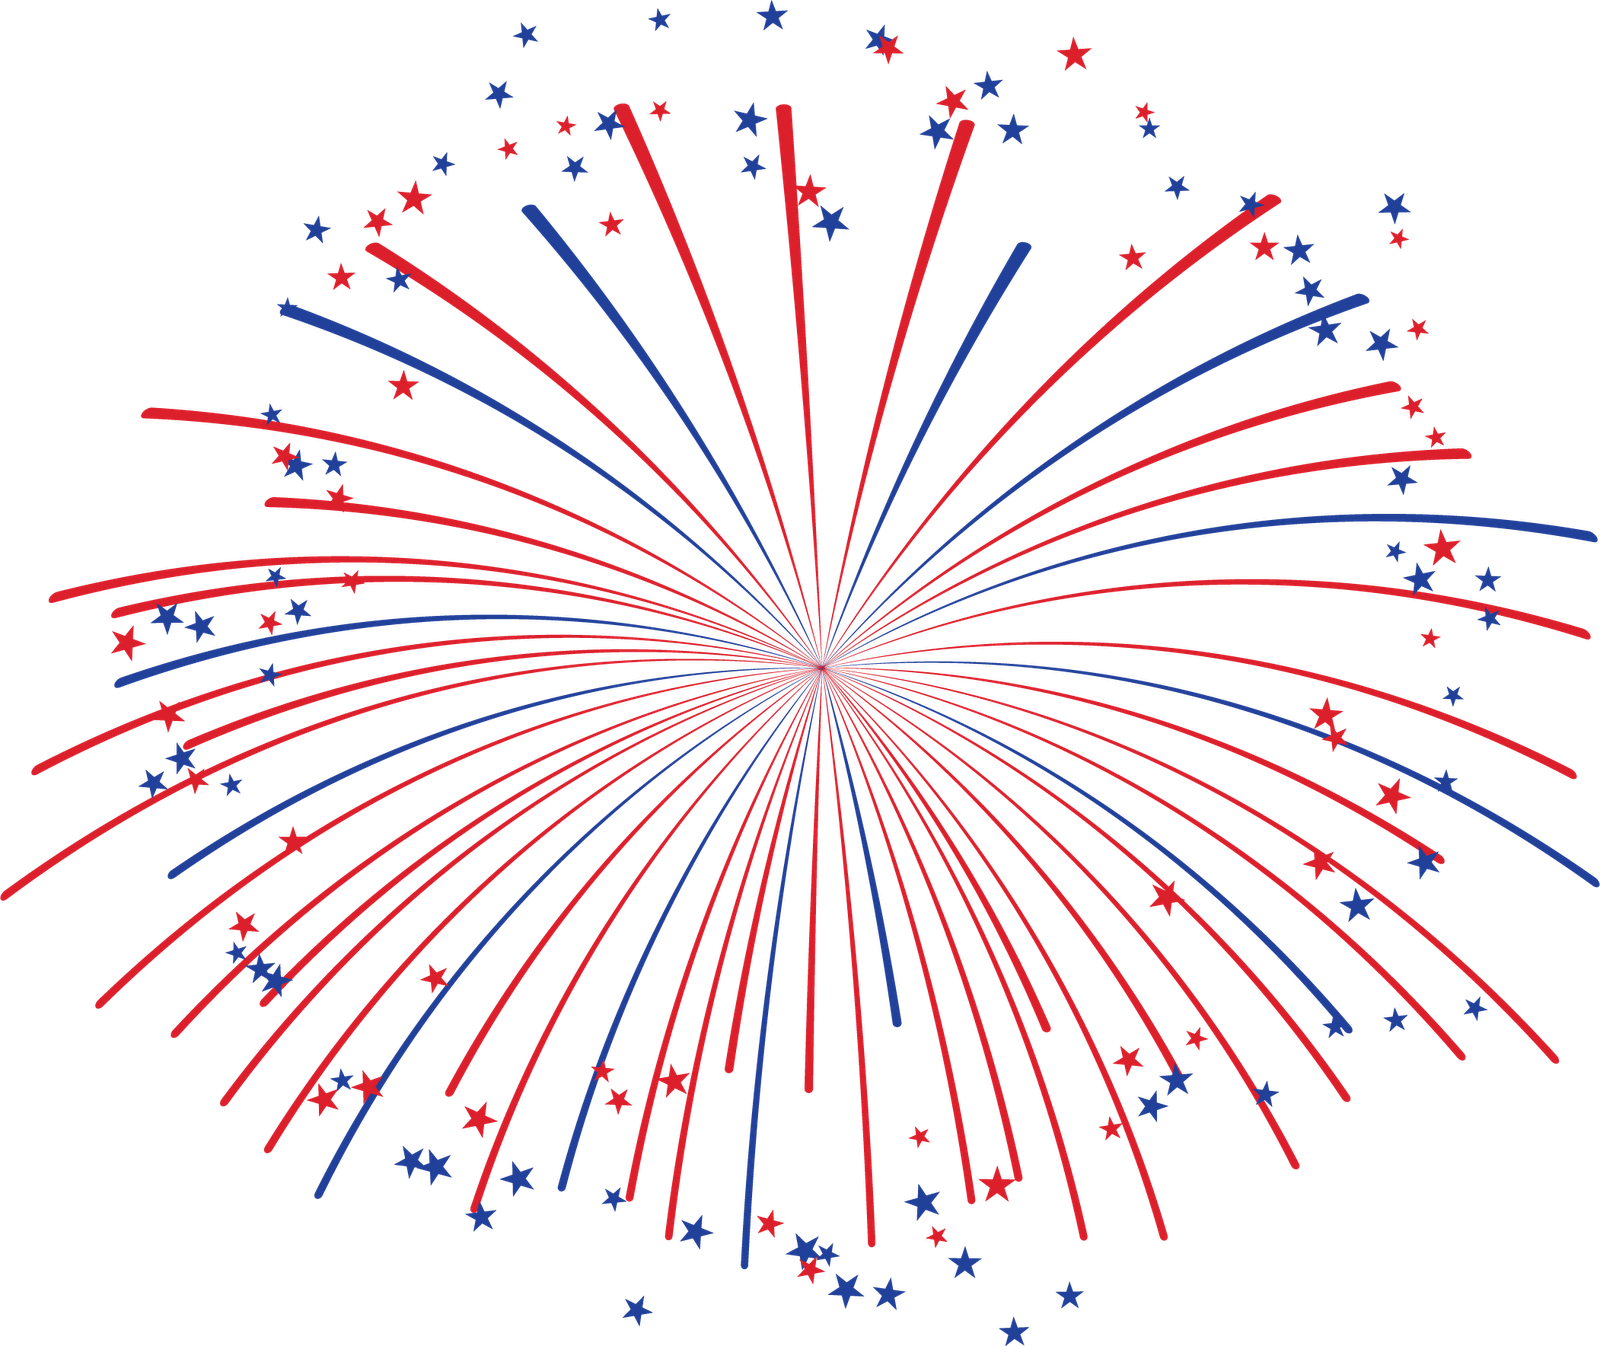 red white and blue fireworks png